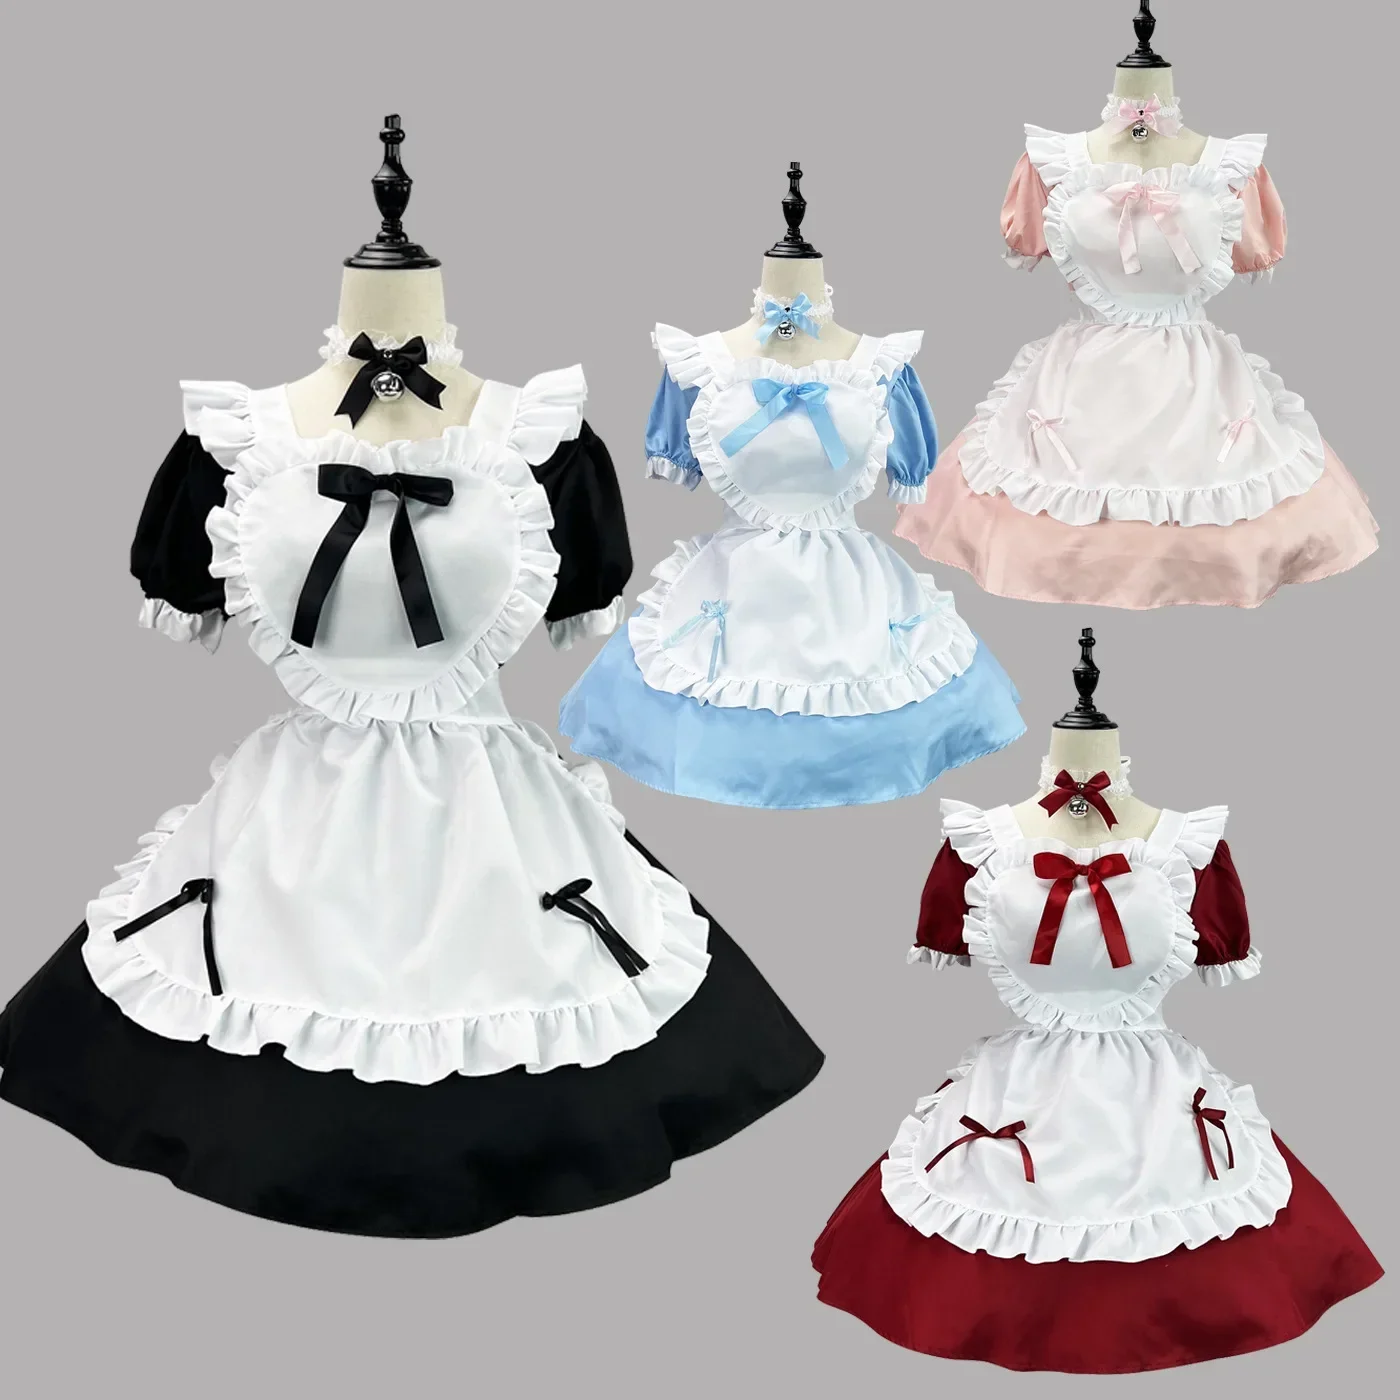 

Anime Cute Heart Lolita Maid Cosplay Costume 4Colors Alice Dress Girls Woman Waitress Maid Party Stage Costumes Alice Maid Dress